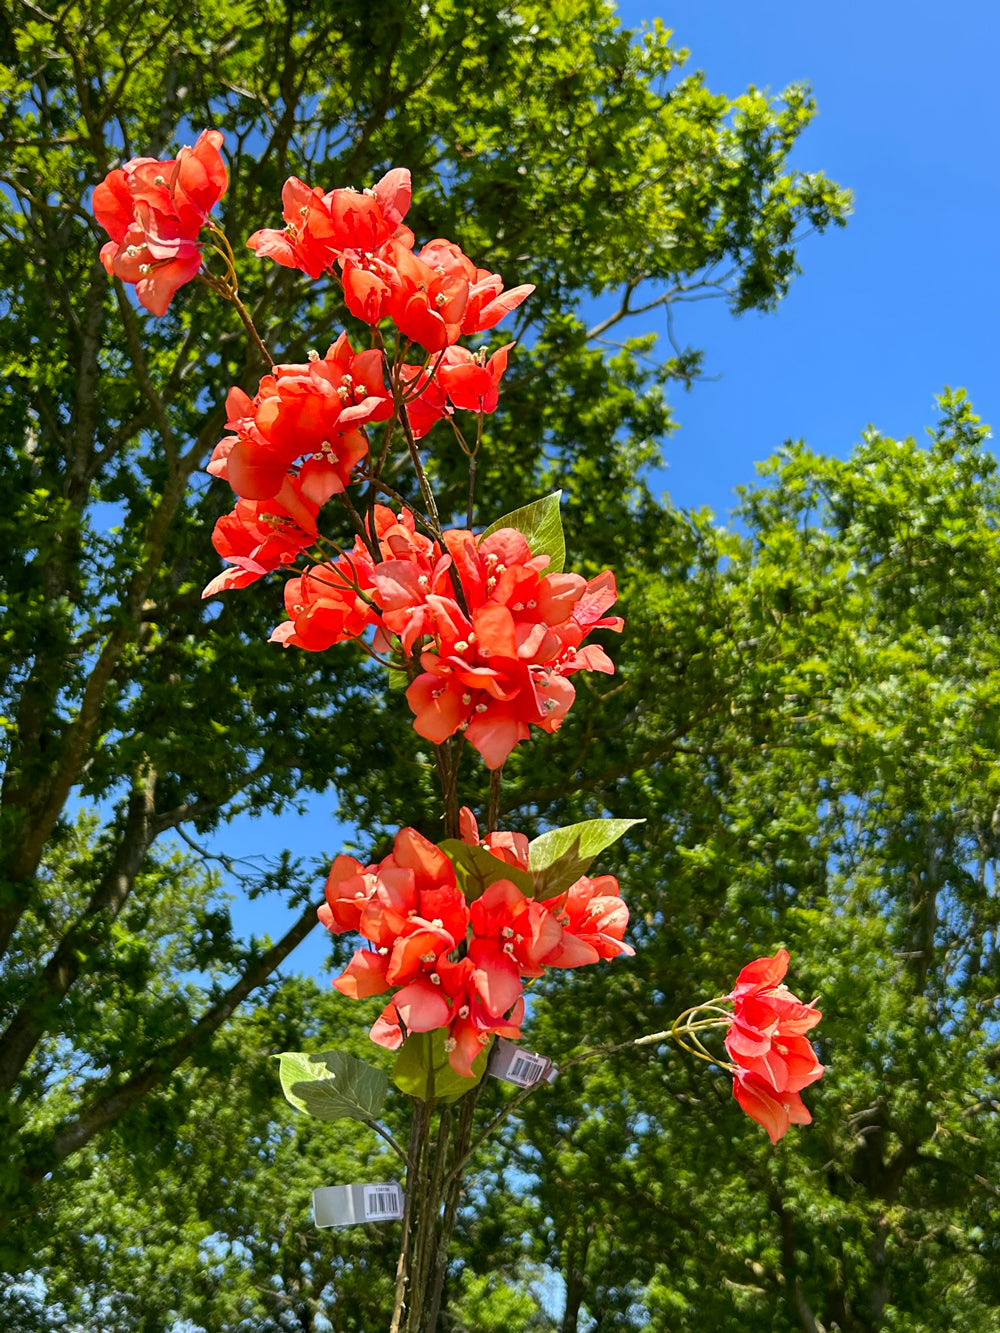 Faux bouganvillea sprays in a coral pink colour displayed in the sunshine with a tree in the background